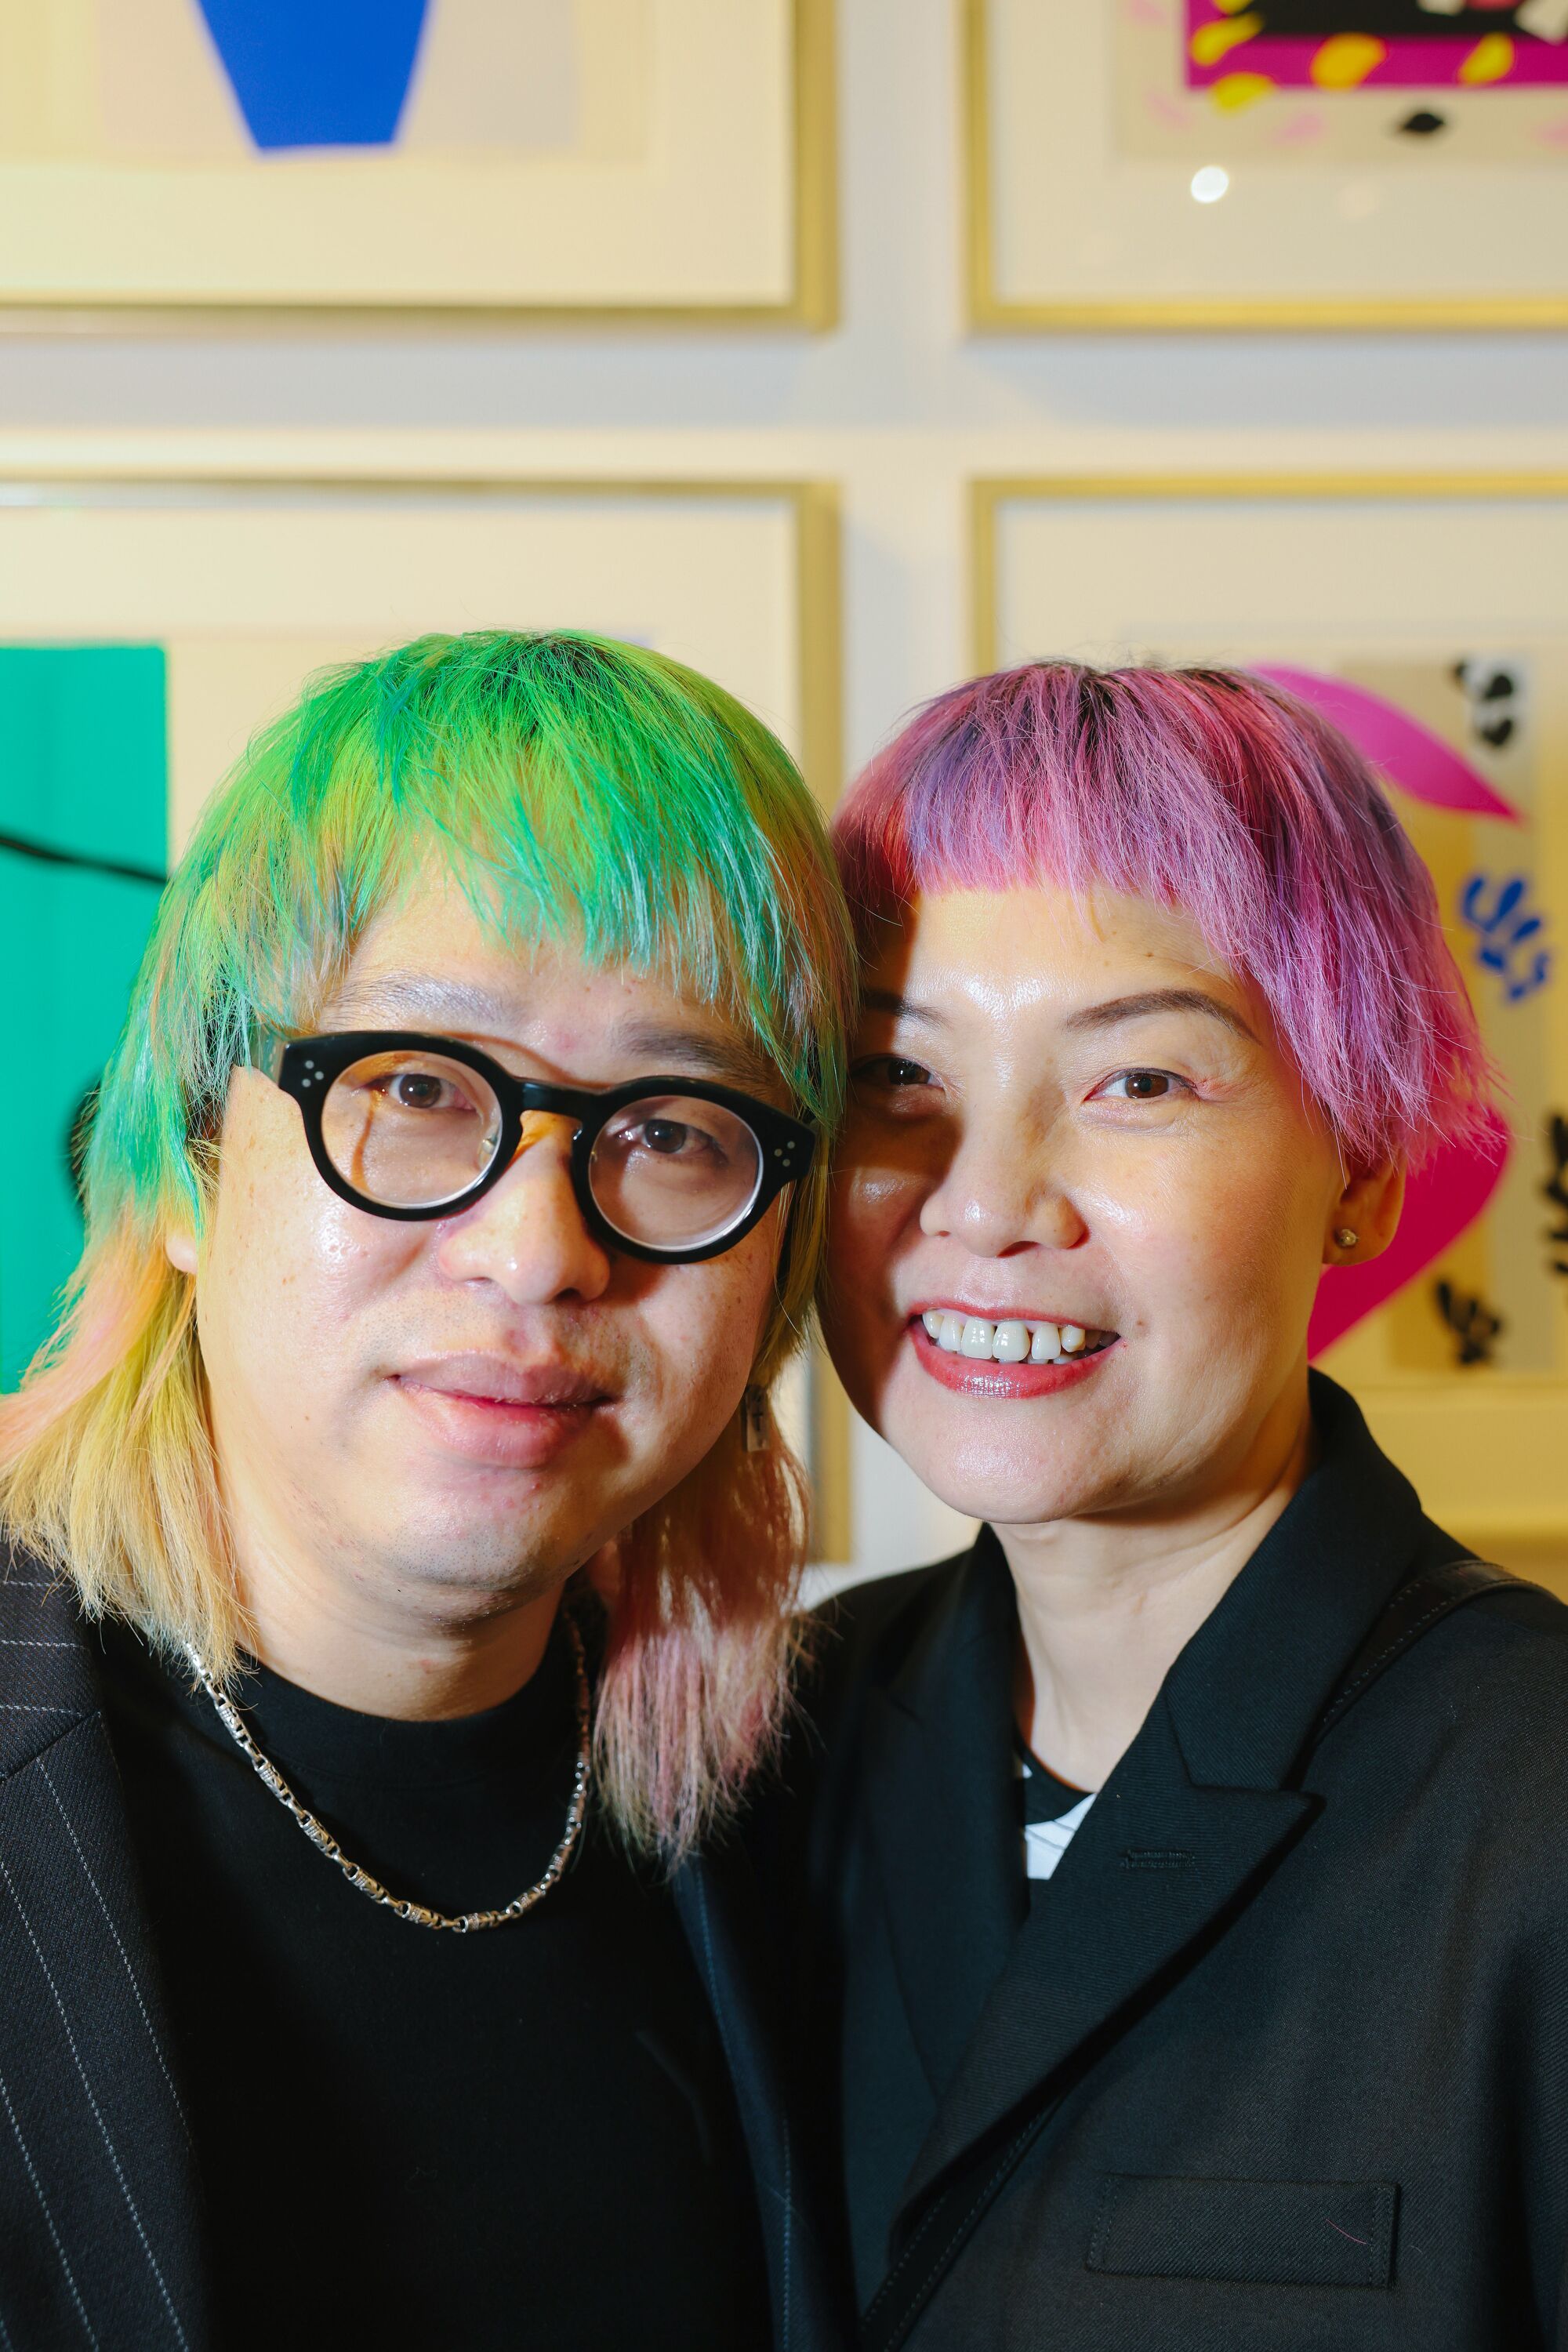 Two people with dyed hair, (green, left, and pink) pose for a photo.